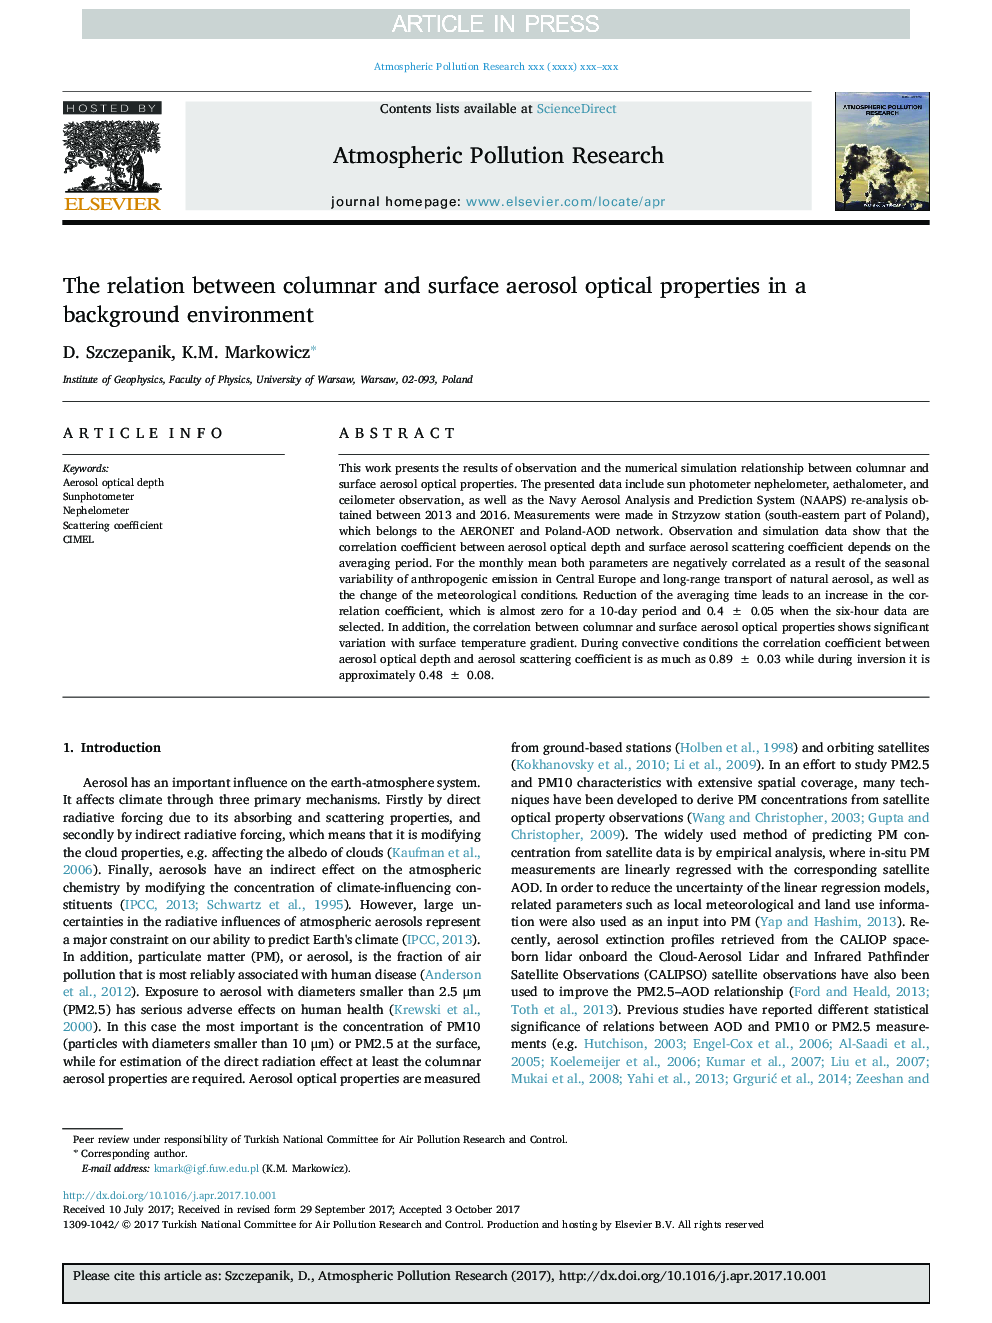 The relation between columnar and surface aerosol optical properties in a background environment